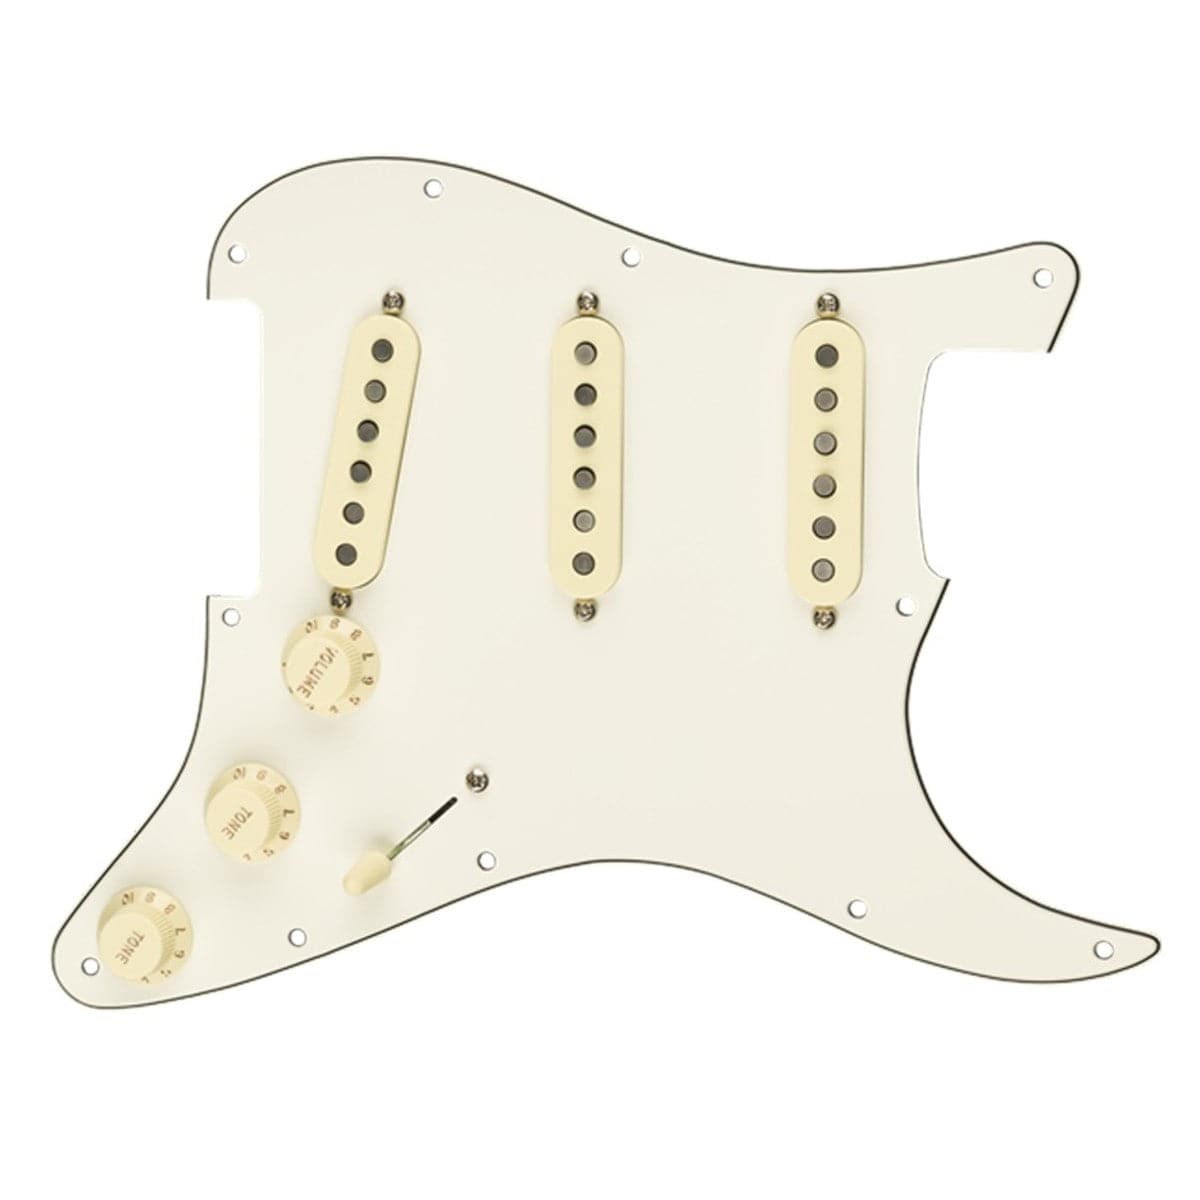 Fender Loaded Pre-Wired Strat Pickguard - Custom Shop Texas Special SSS - Parchment - 11 Hole